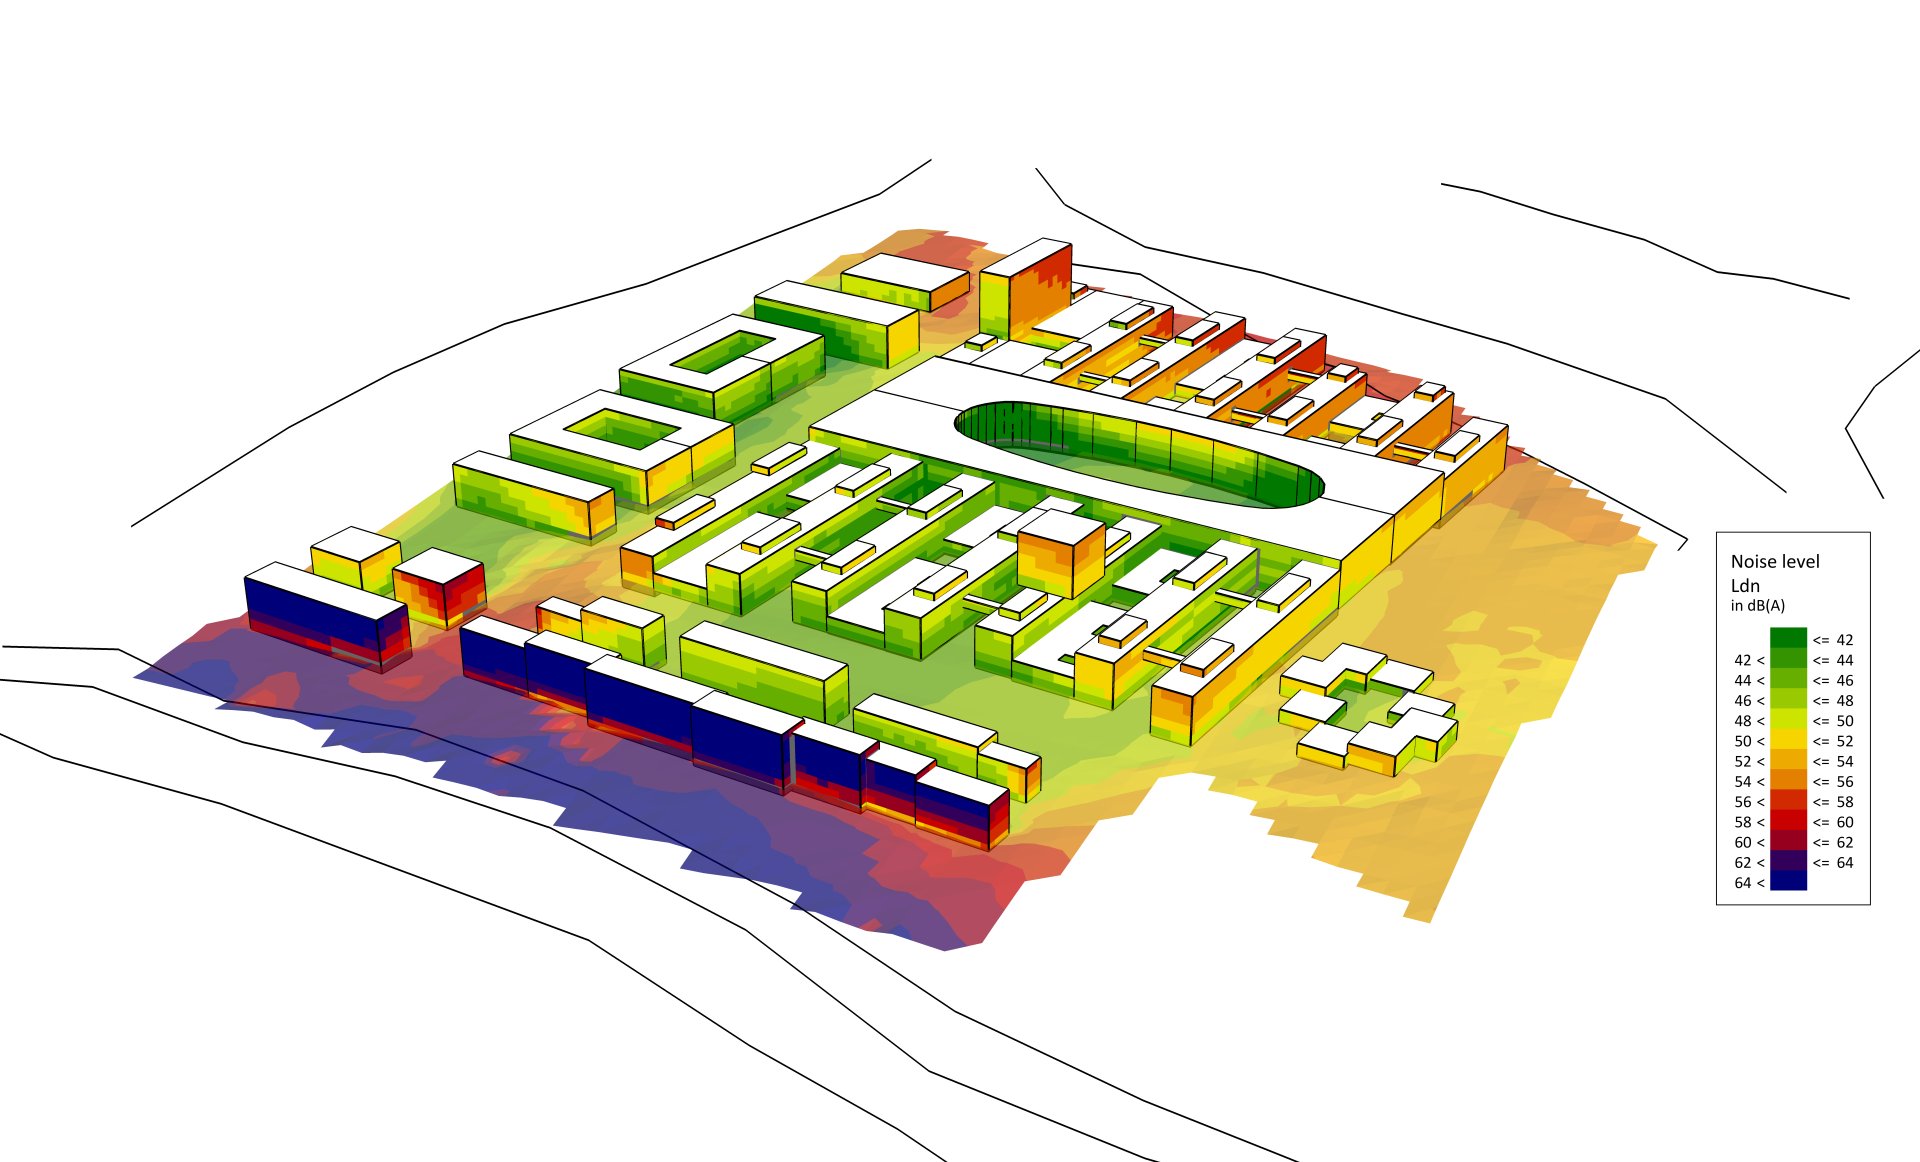 3D plan sketch of a city with the analysis values for sound propagation